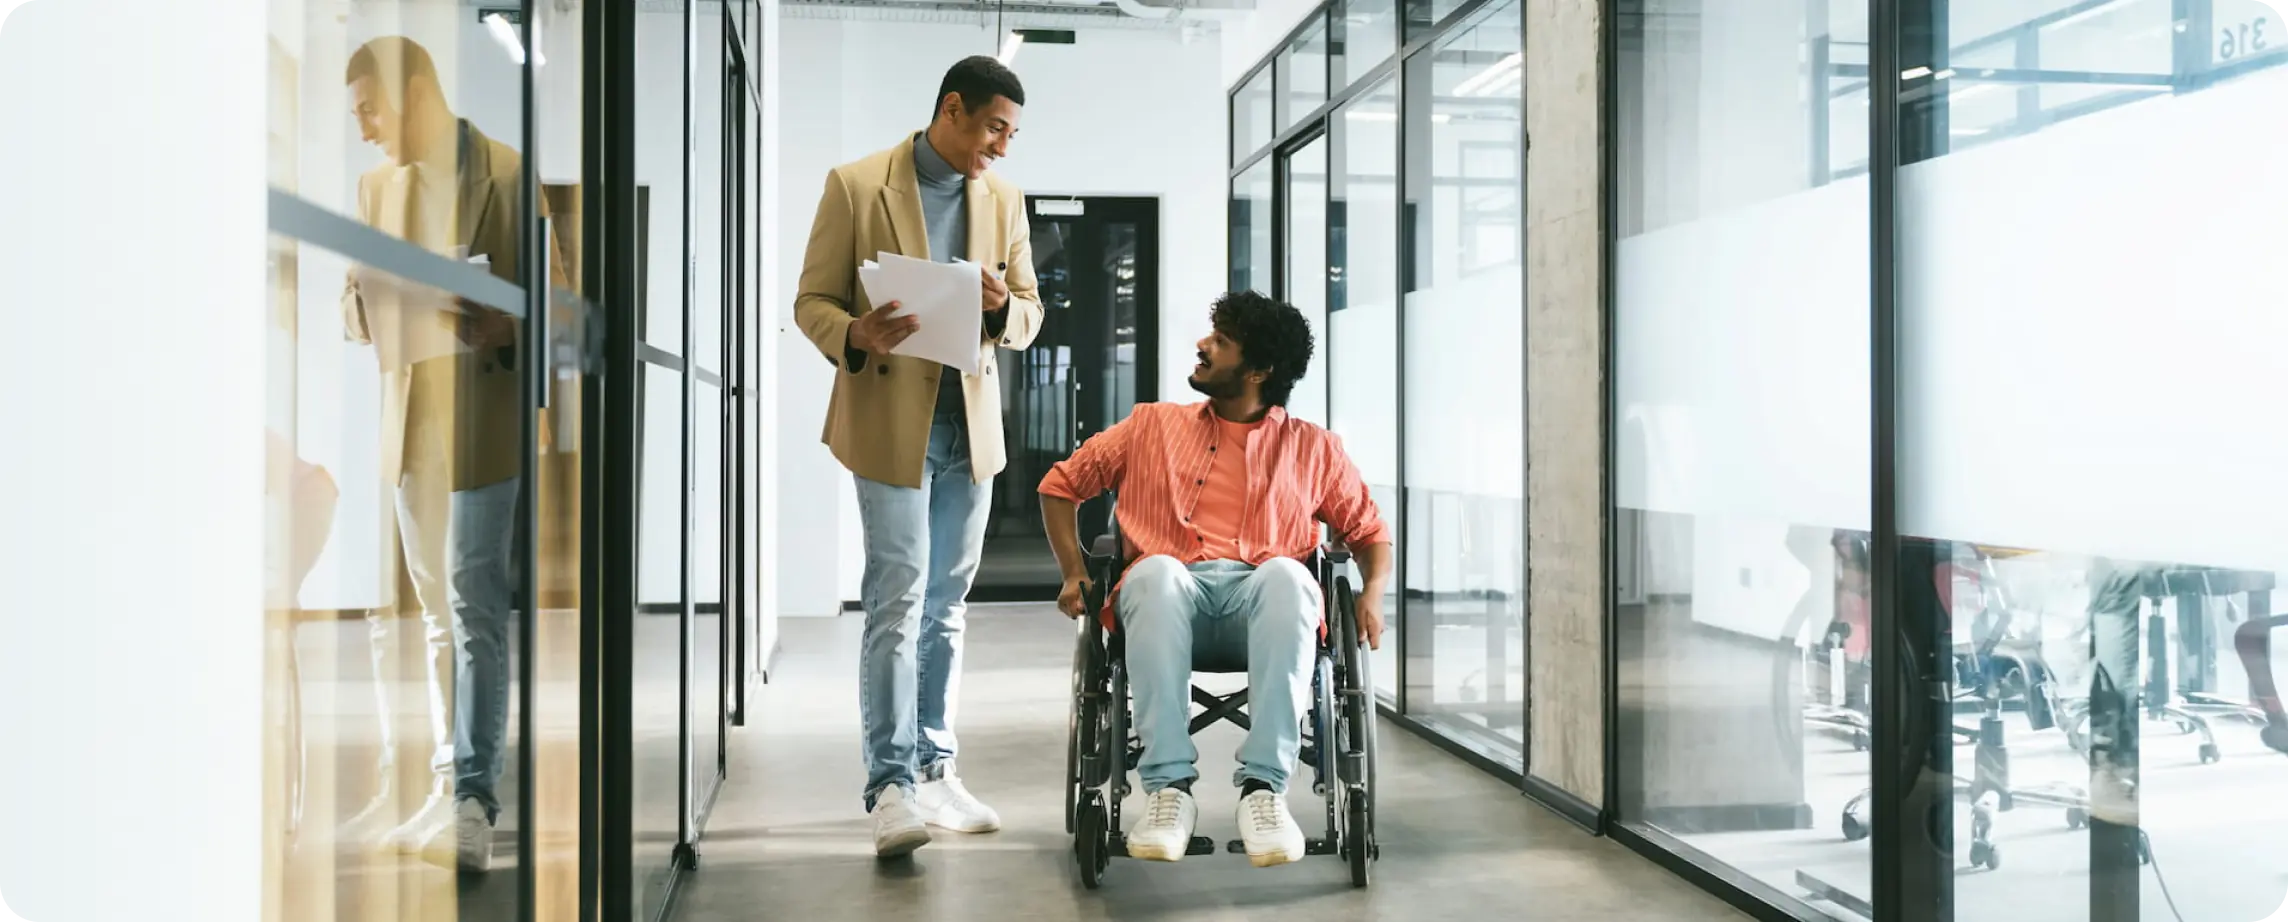 A person in a wheelchair speaking with a friend in an office hallway.